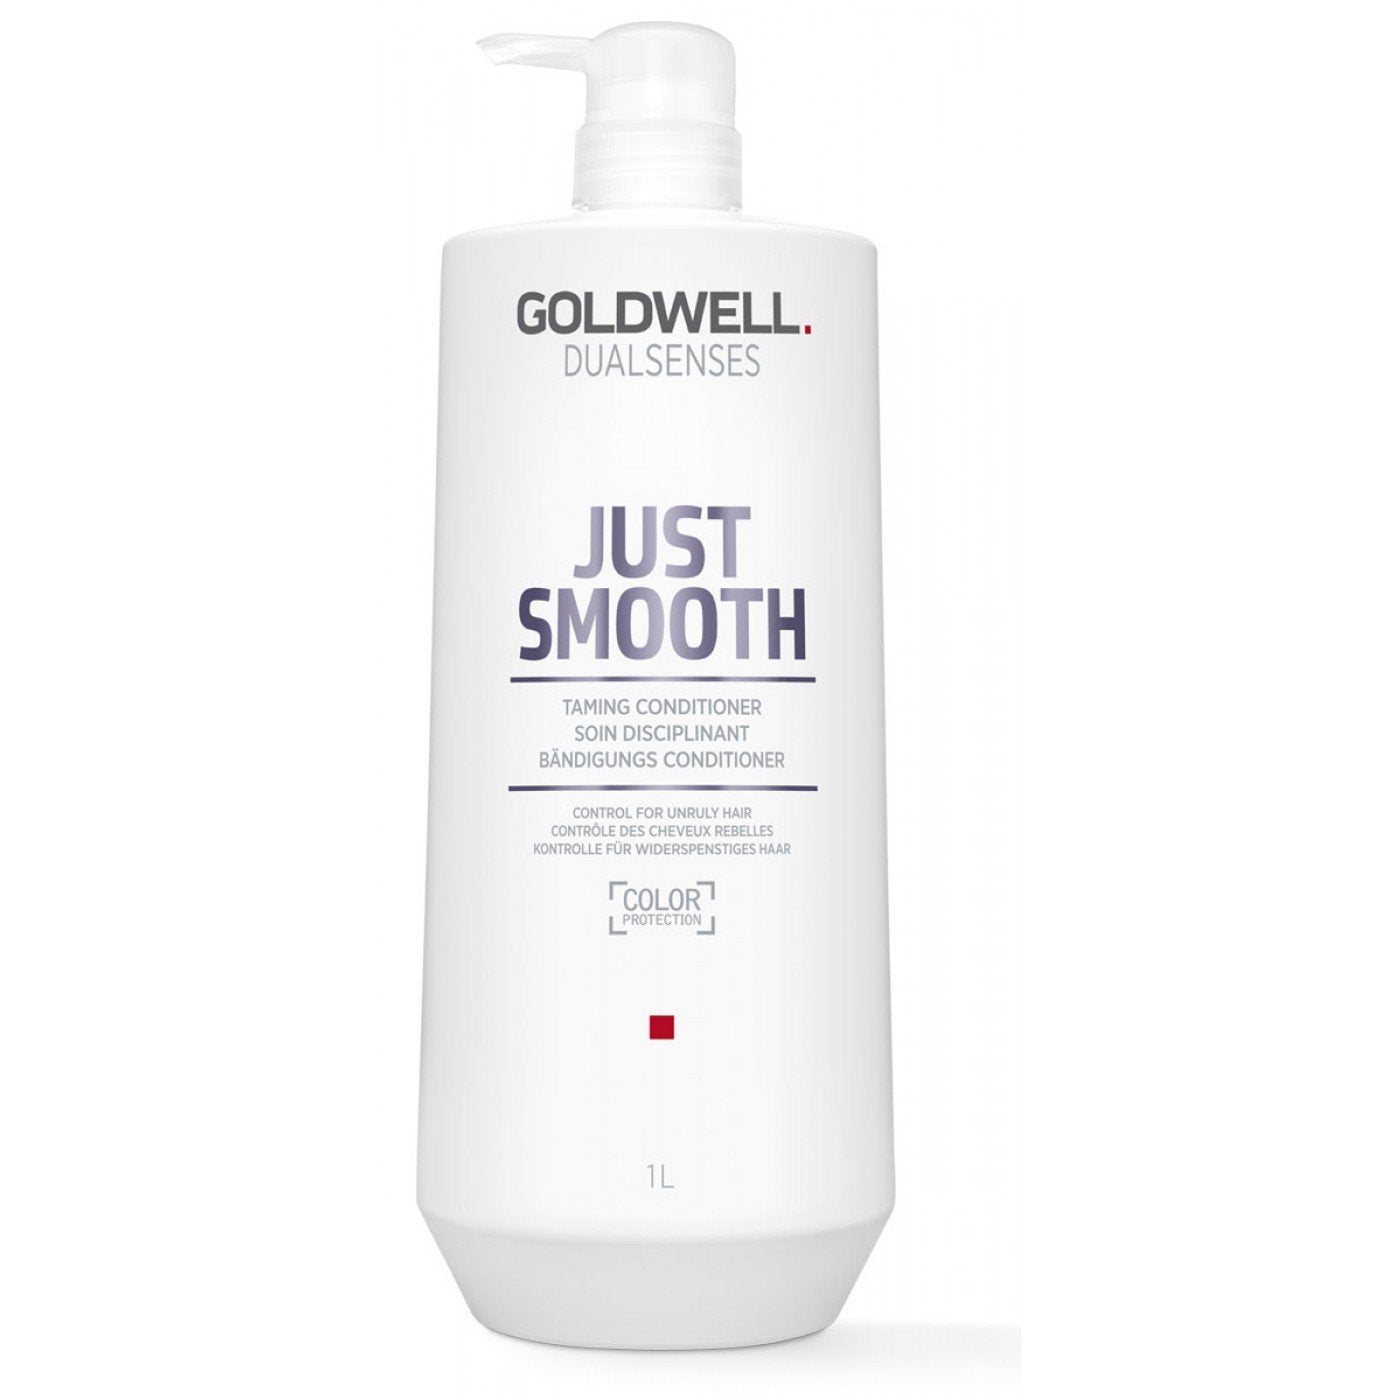 Just Smooth Taming Conditioner 1L